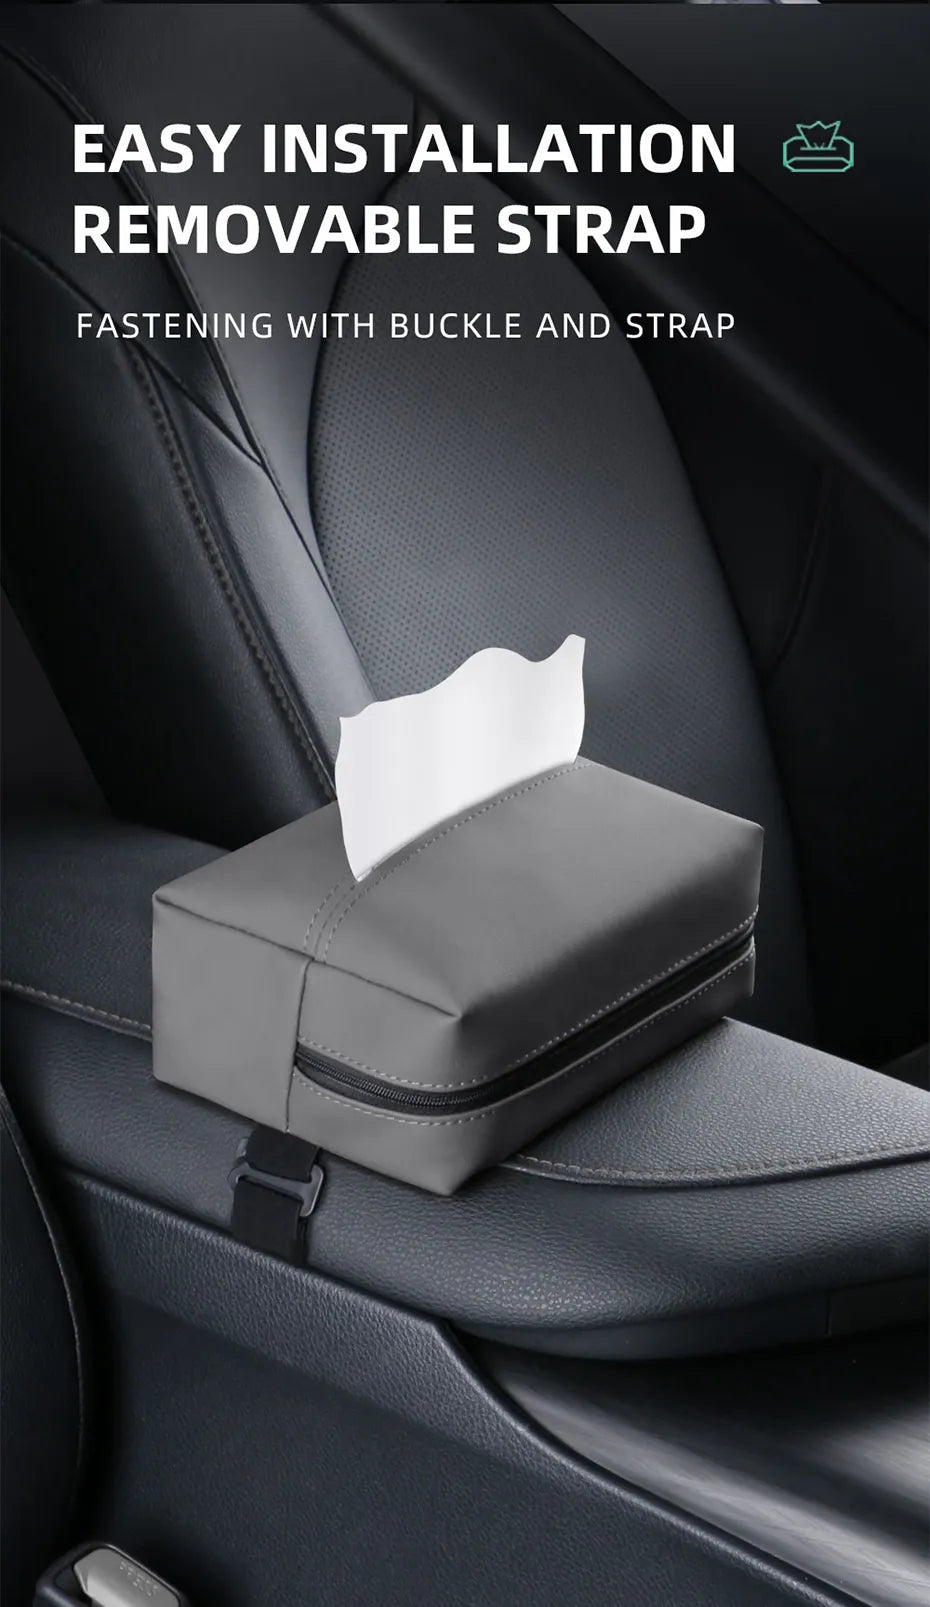  The image displays a sleek, gray Nappa leather car tissue box holder positioned on a car seat. It is secured by a removable strap with a buckle that neatly fits around the seat, ensuring the holder stays in place. The top of the holder is partially open, revealing the white tissues inside, ready for use. The design is minimalist, emphasizing functionality and easy installation in a vehicle's interior.